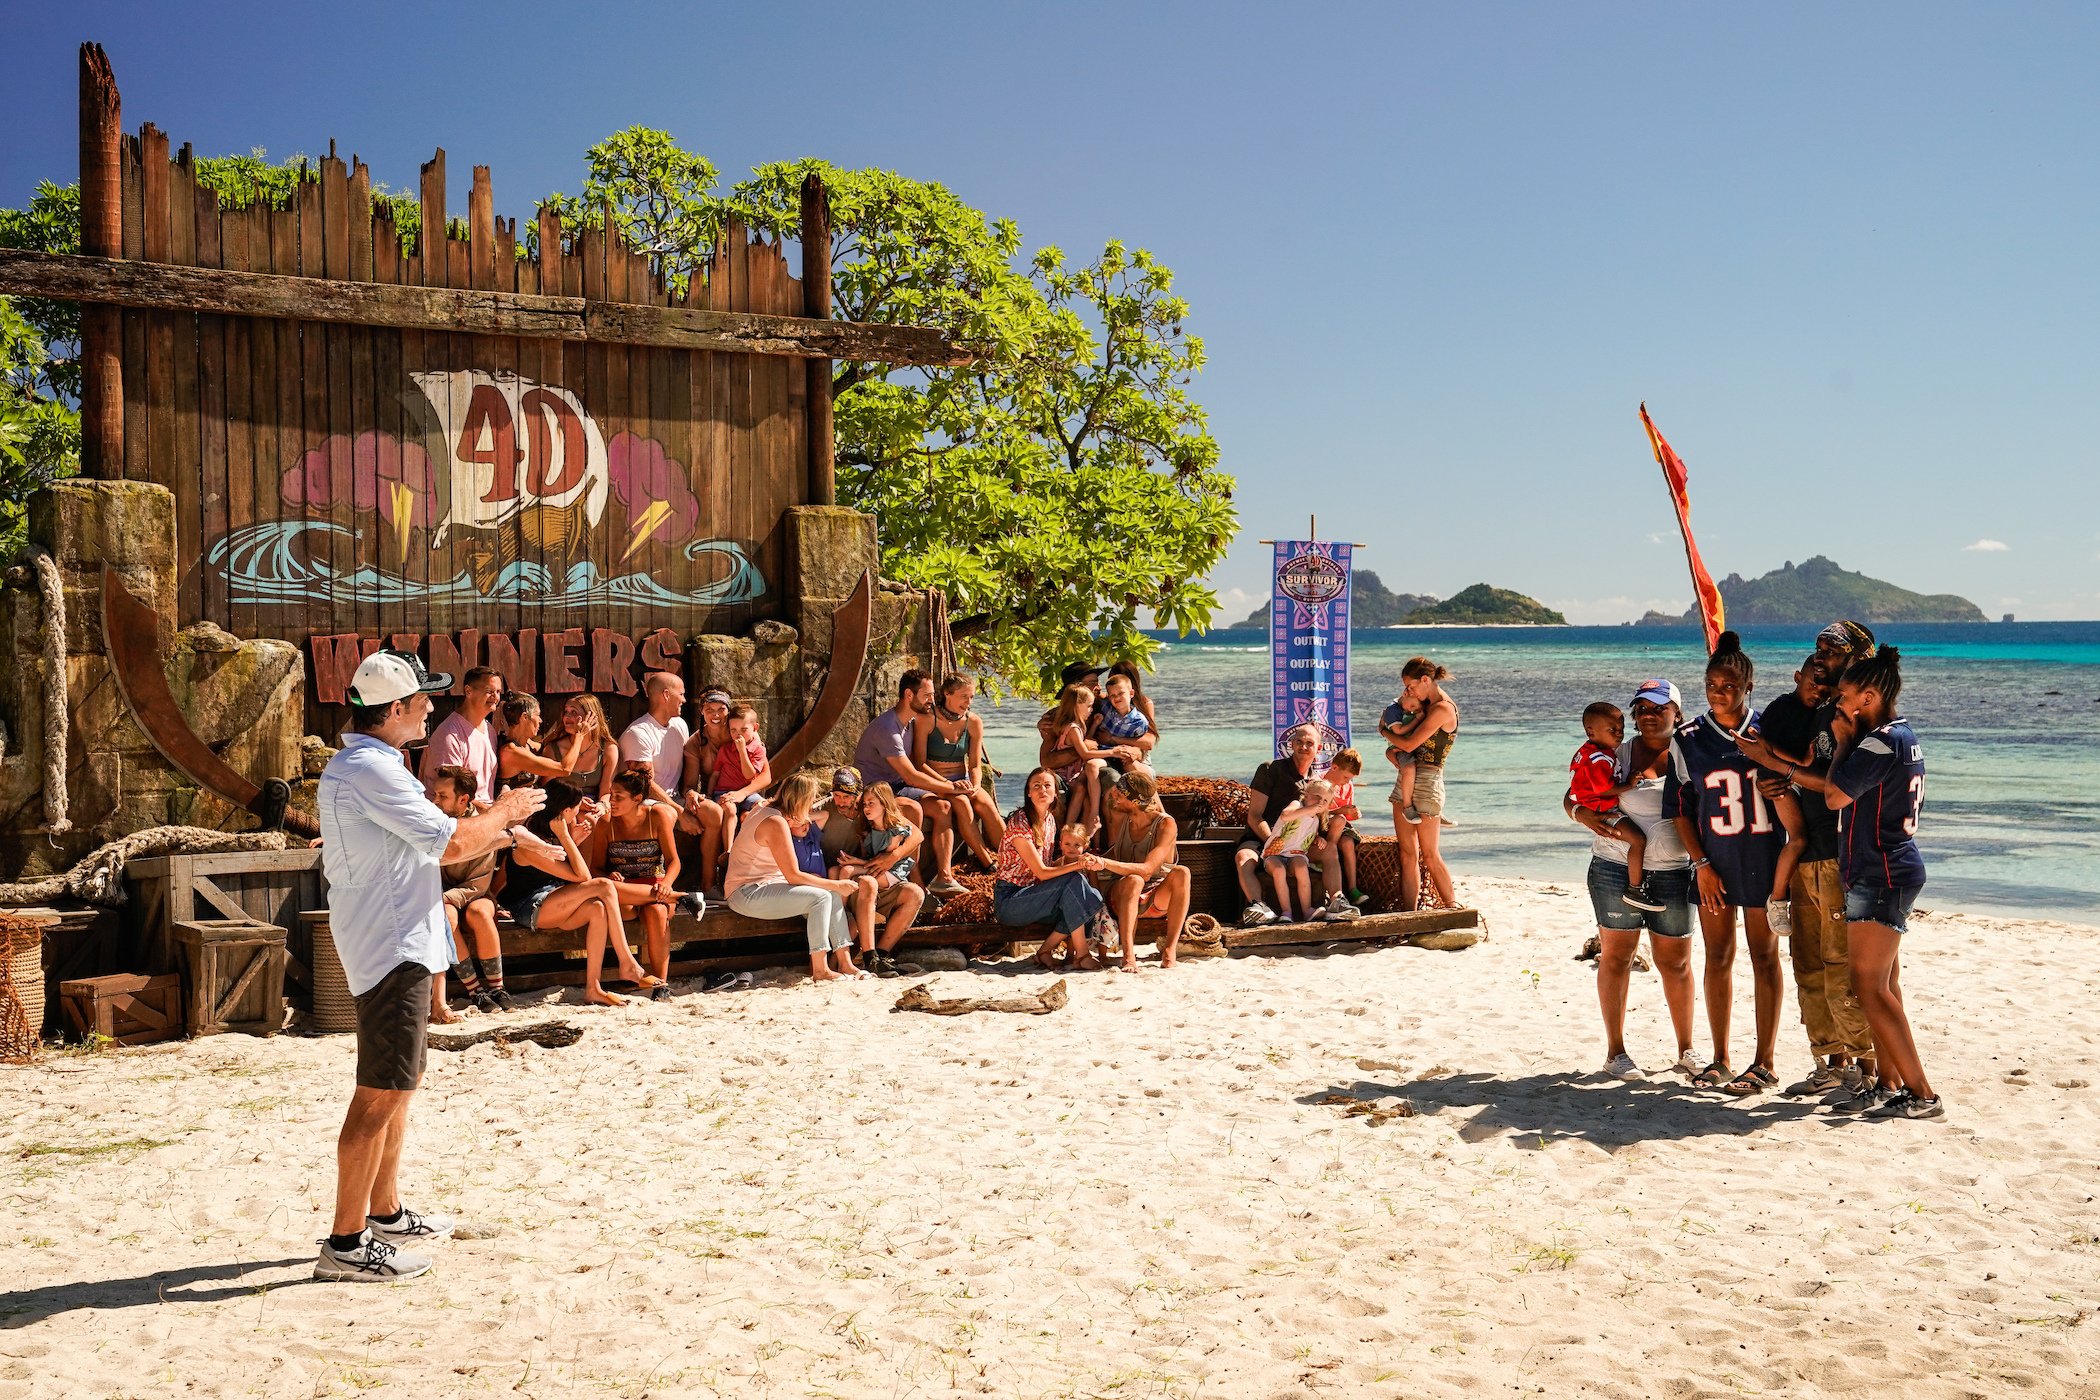 Jeff Probst, the host of 'Survivor' Season 41, on the beach with the players of 'Survivor: Winners at War' 